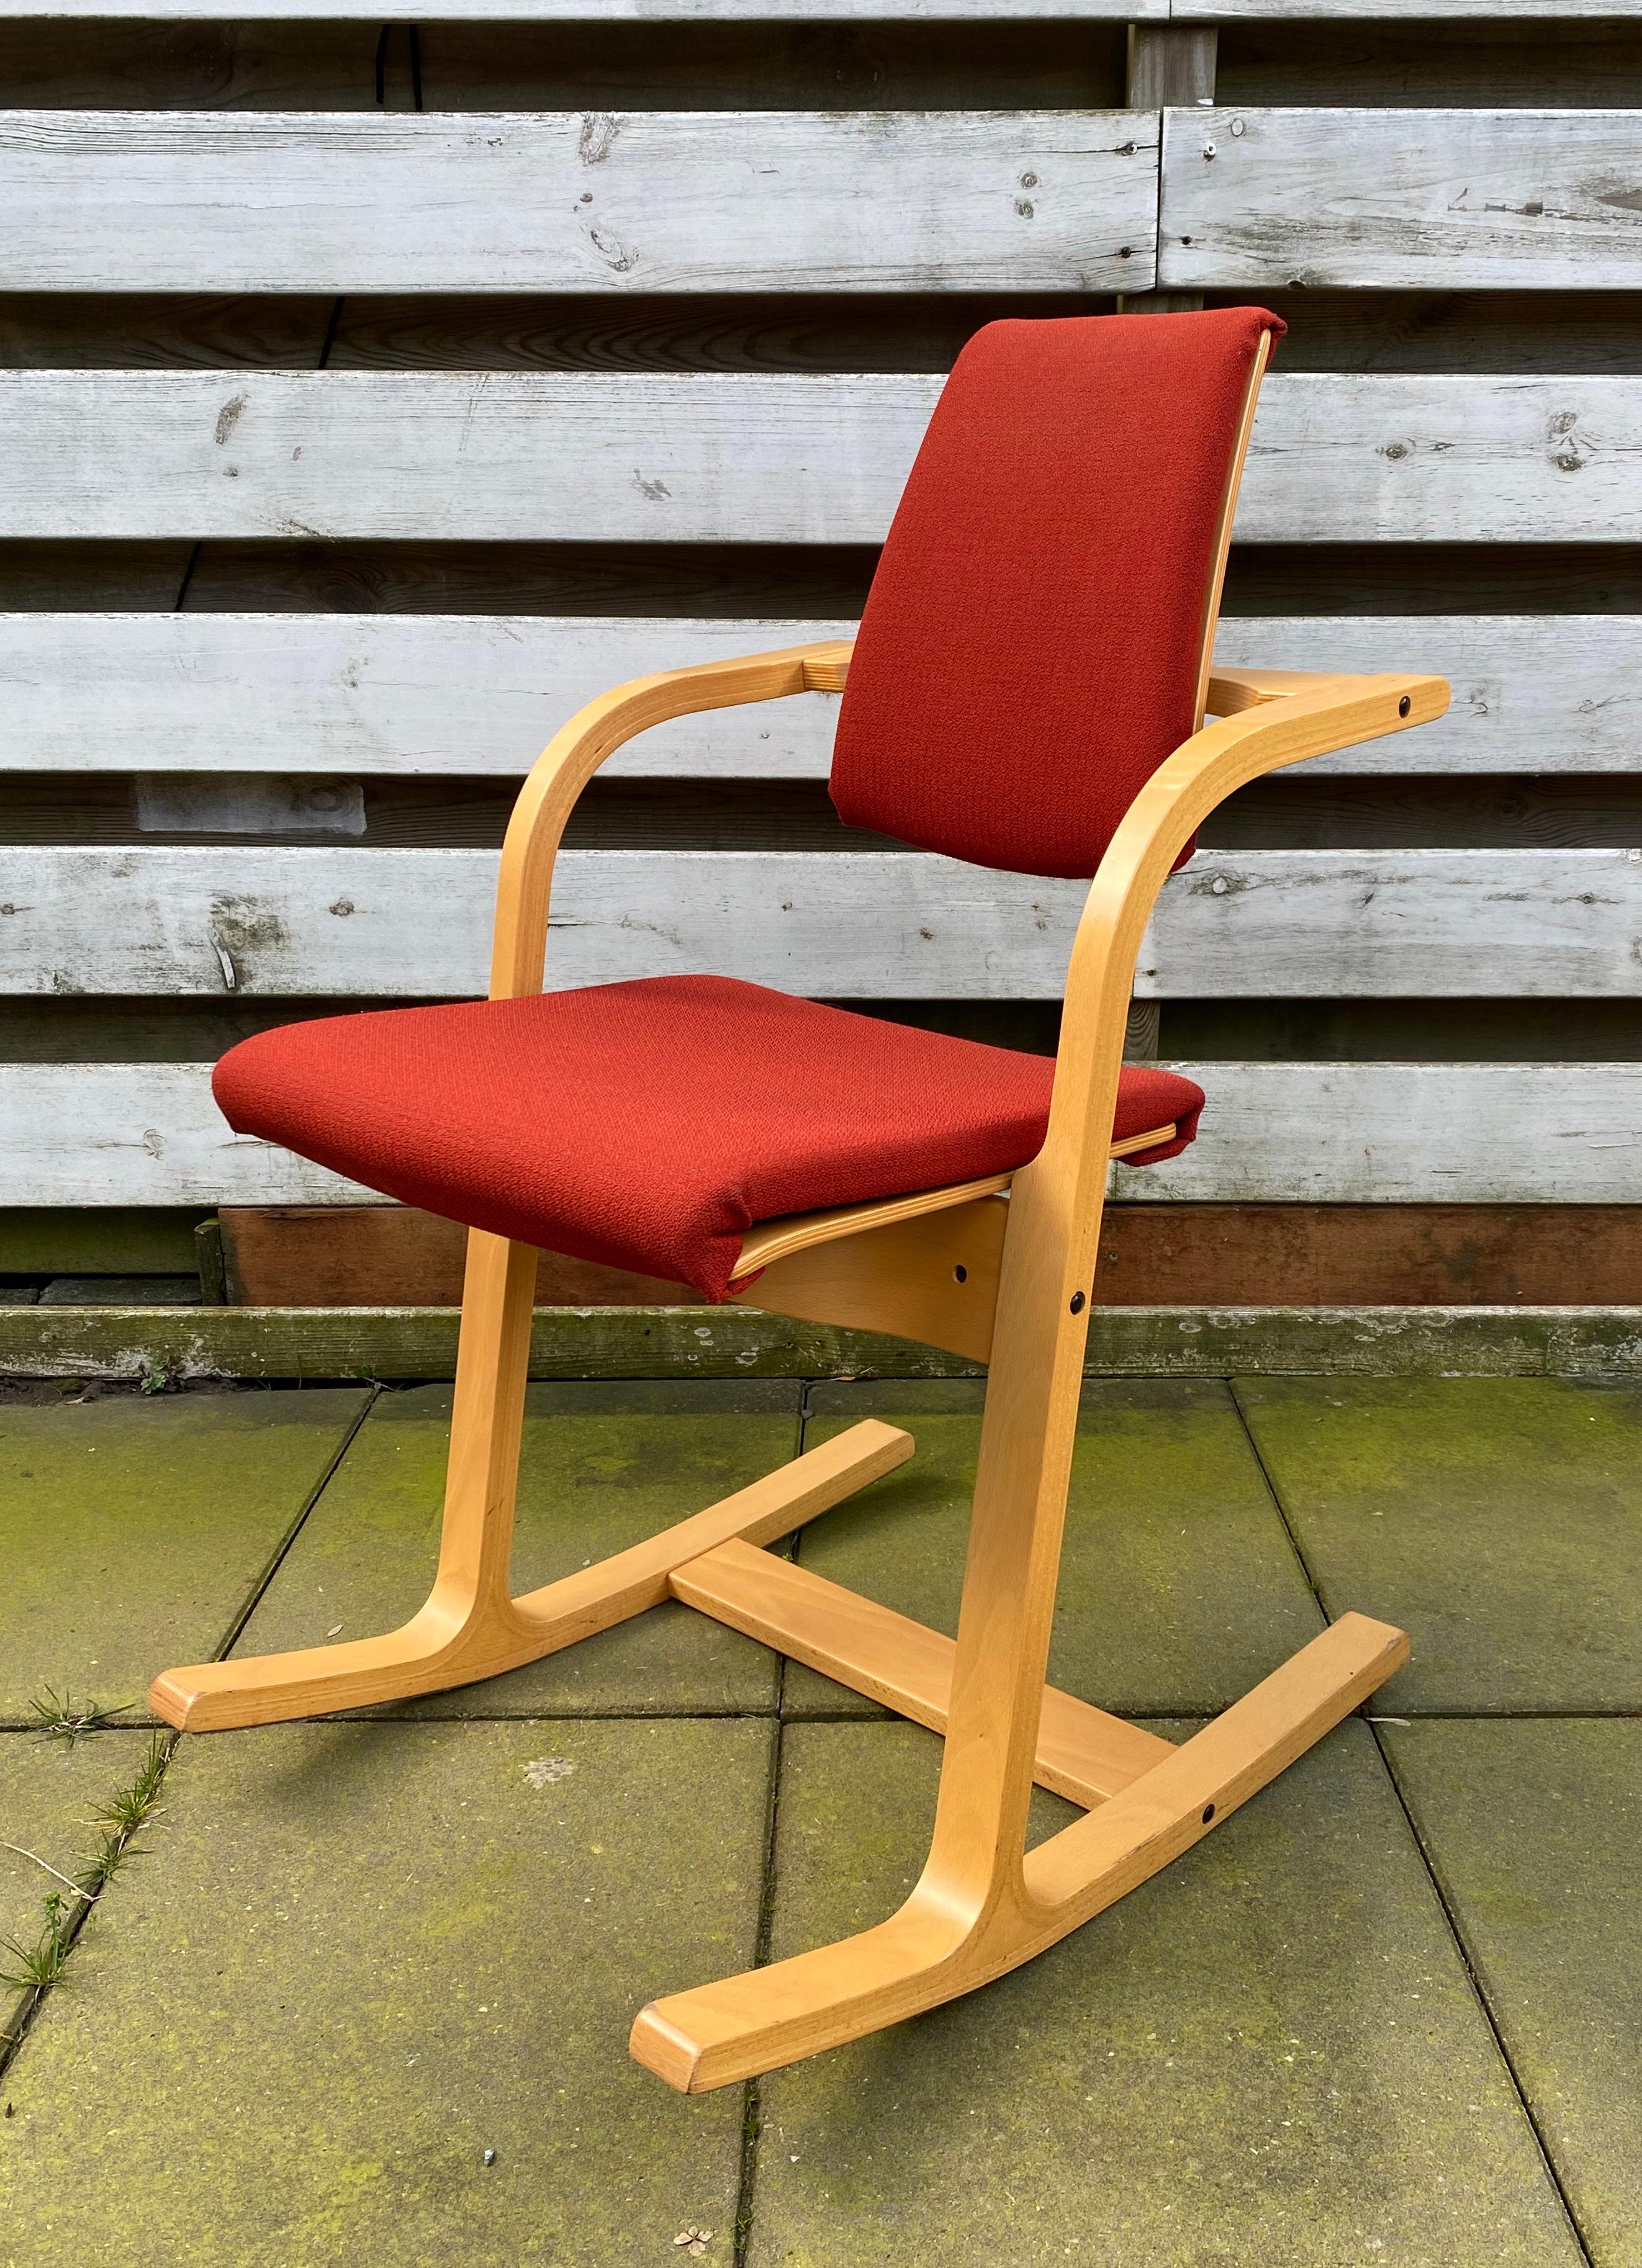 Fabric Stokke Varier Actulum, Balance Chairs, Dinner Chairs, Rocking Chairs